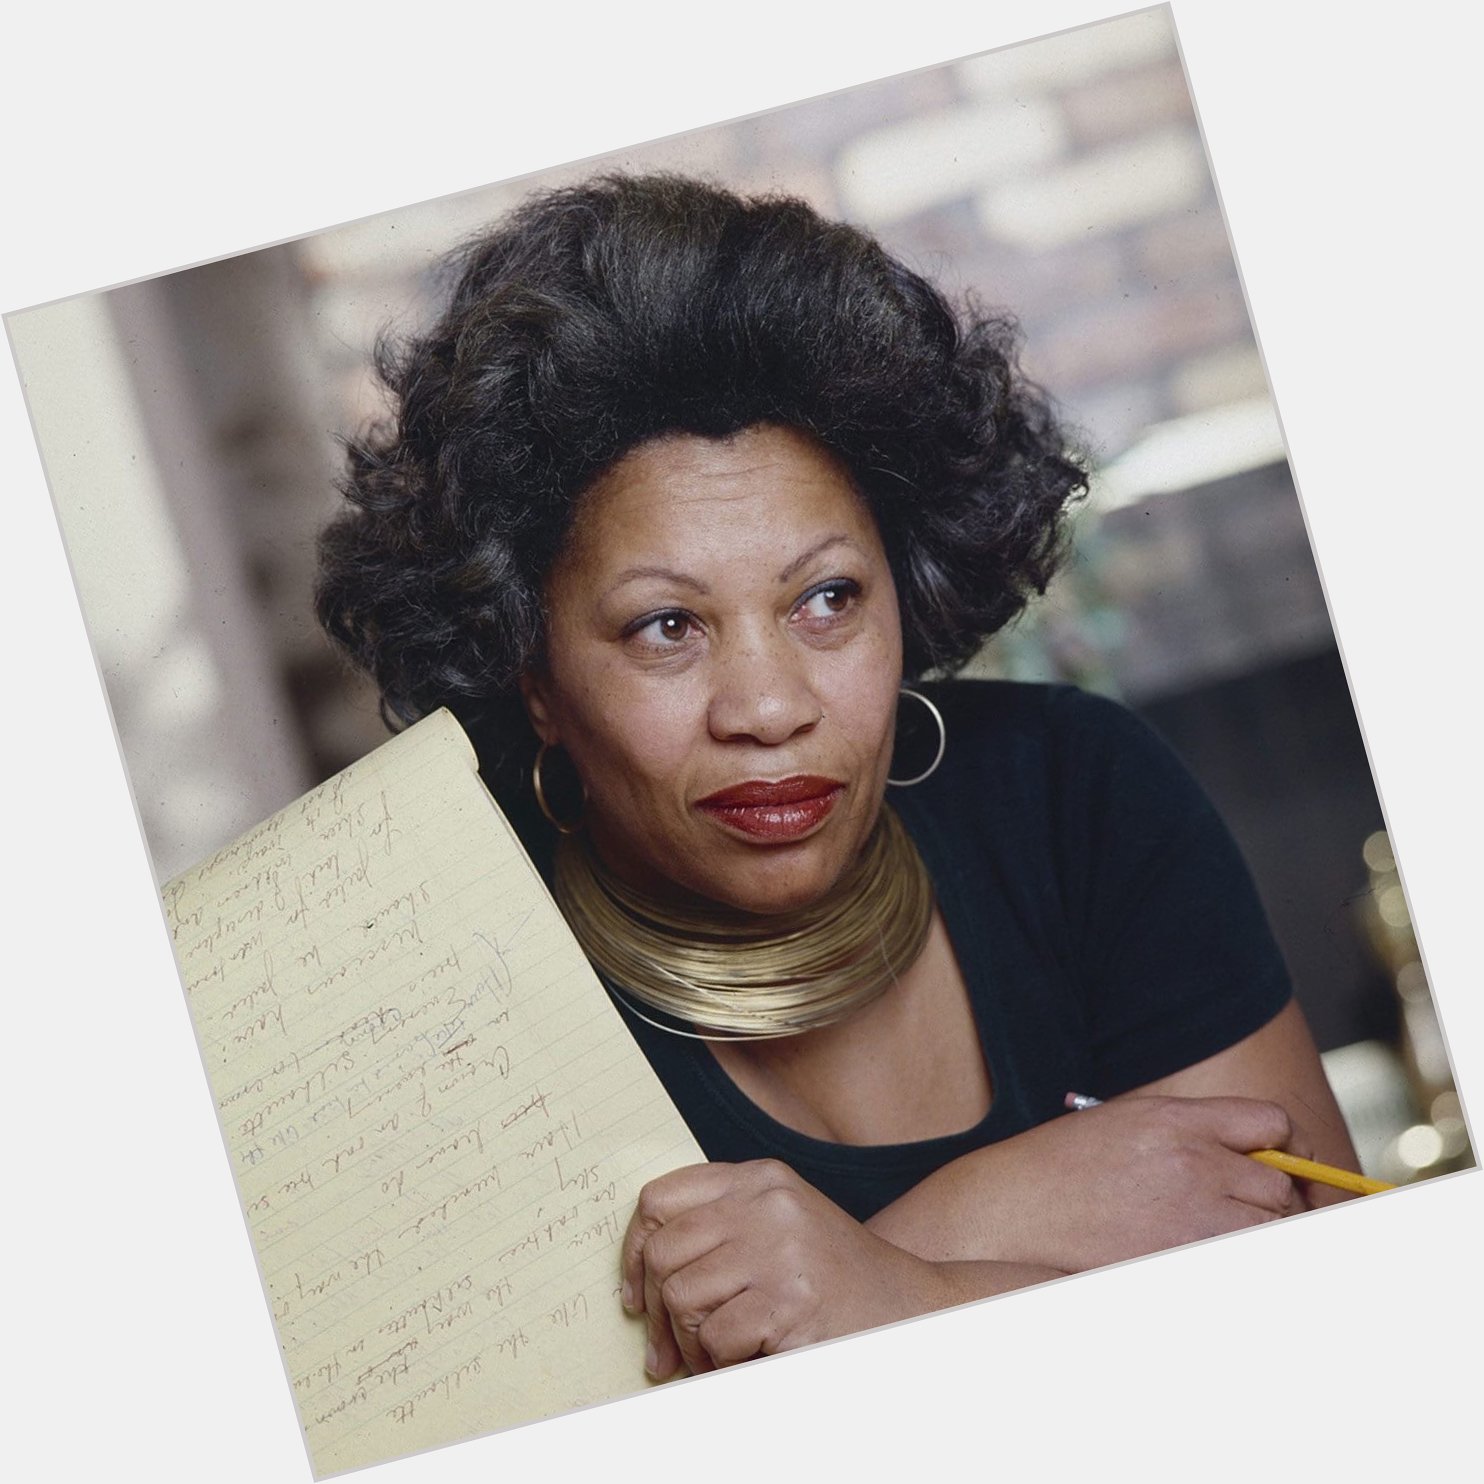 Happy Birthday Toni Morrison If you want to fly, you have to give up the things that weigh you down 